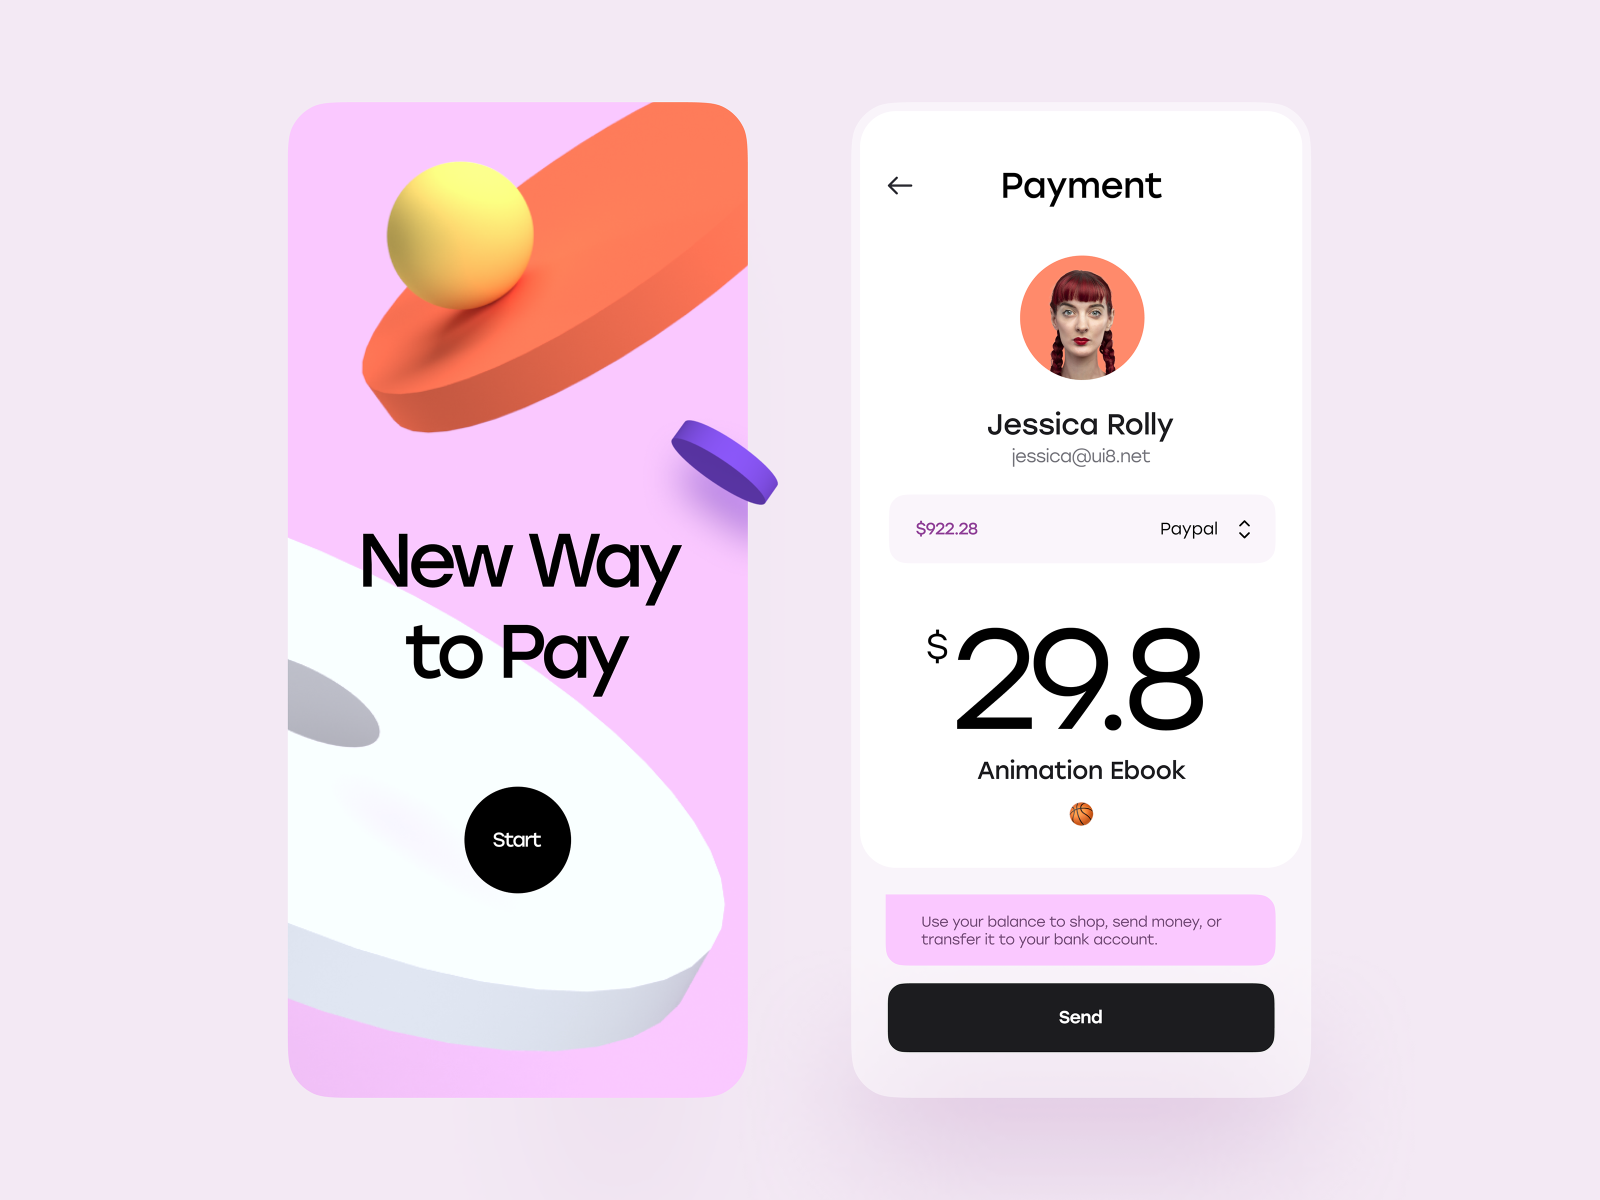 iPay - Mobile App Concept